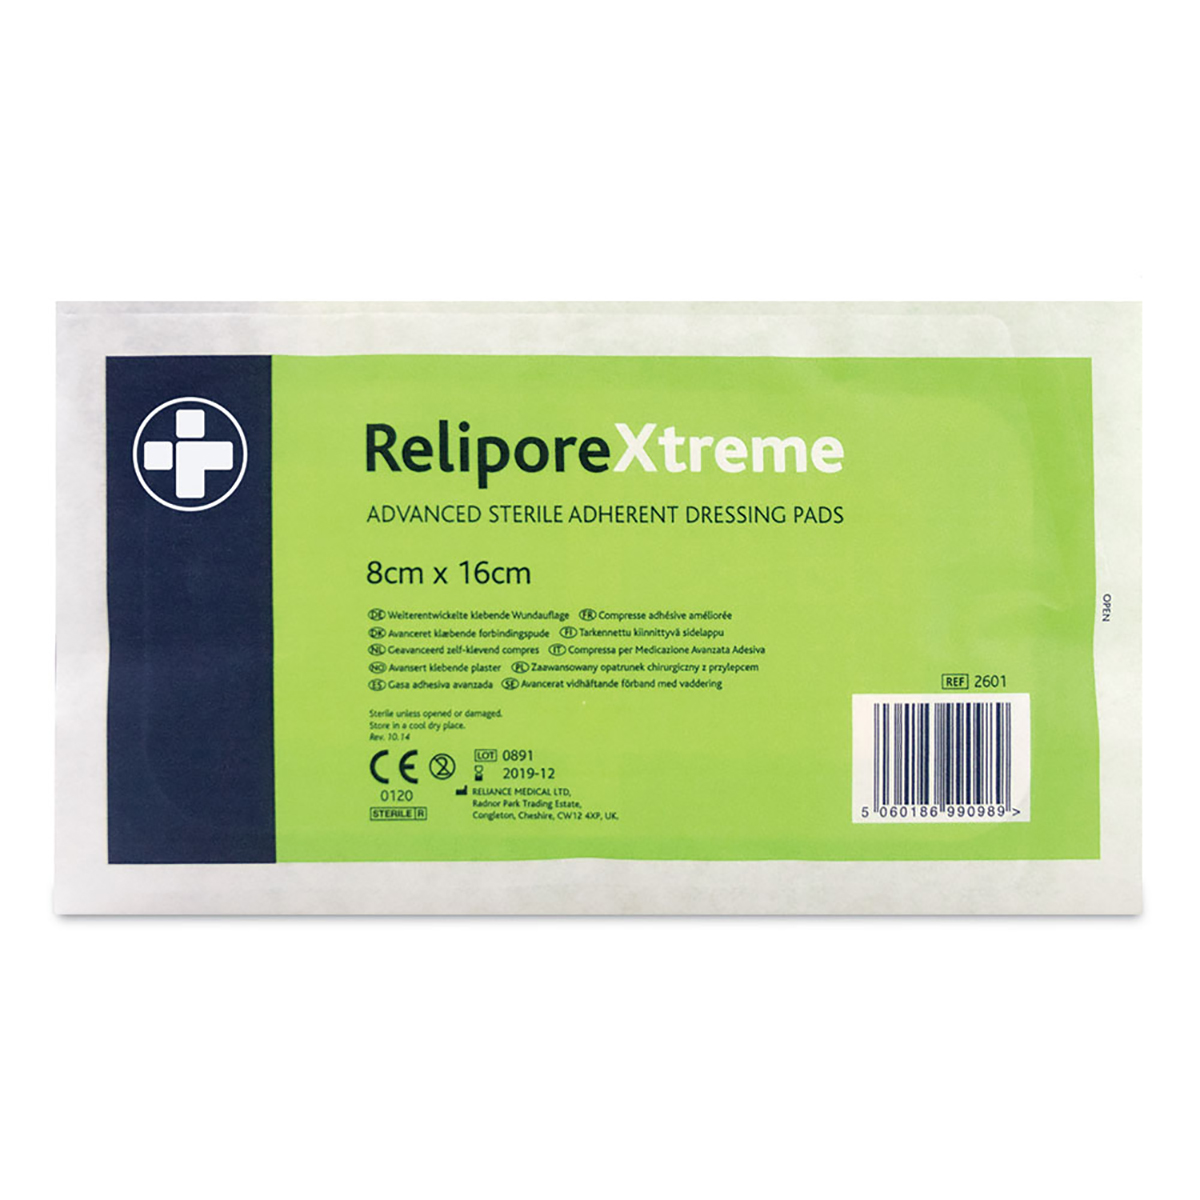 Pack of 50 8cm x 16 cm Reliporextreme Dressing Pad